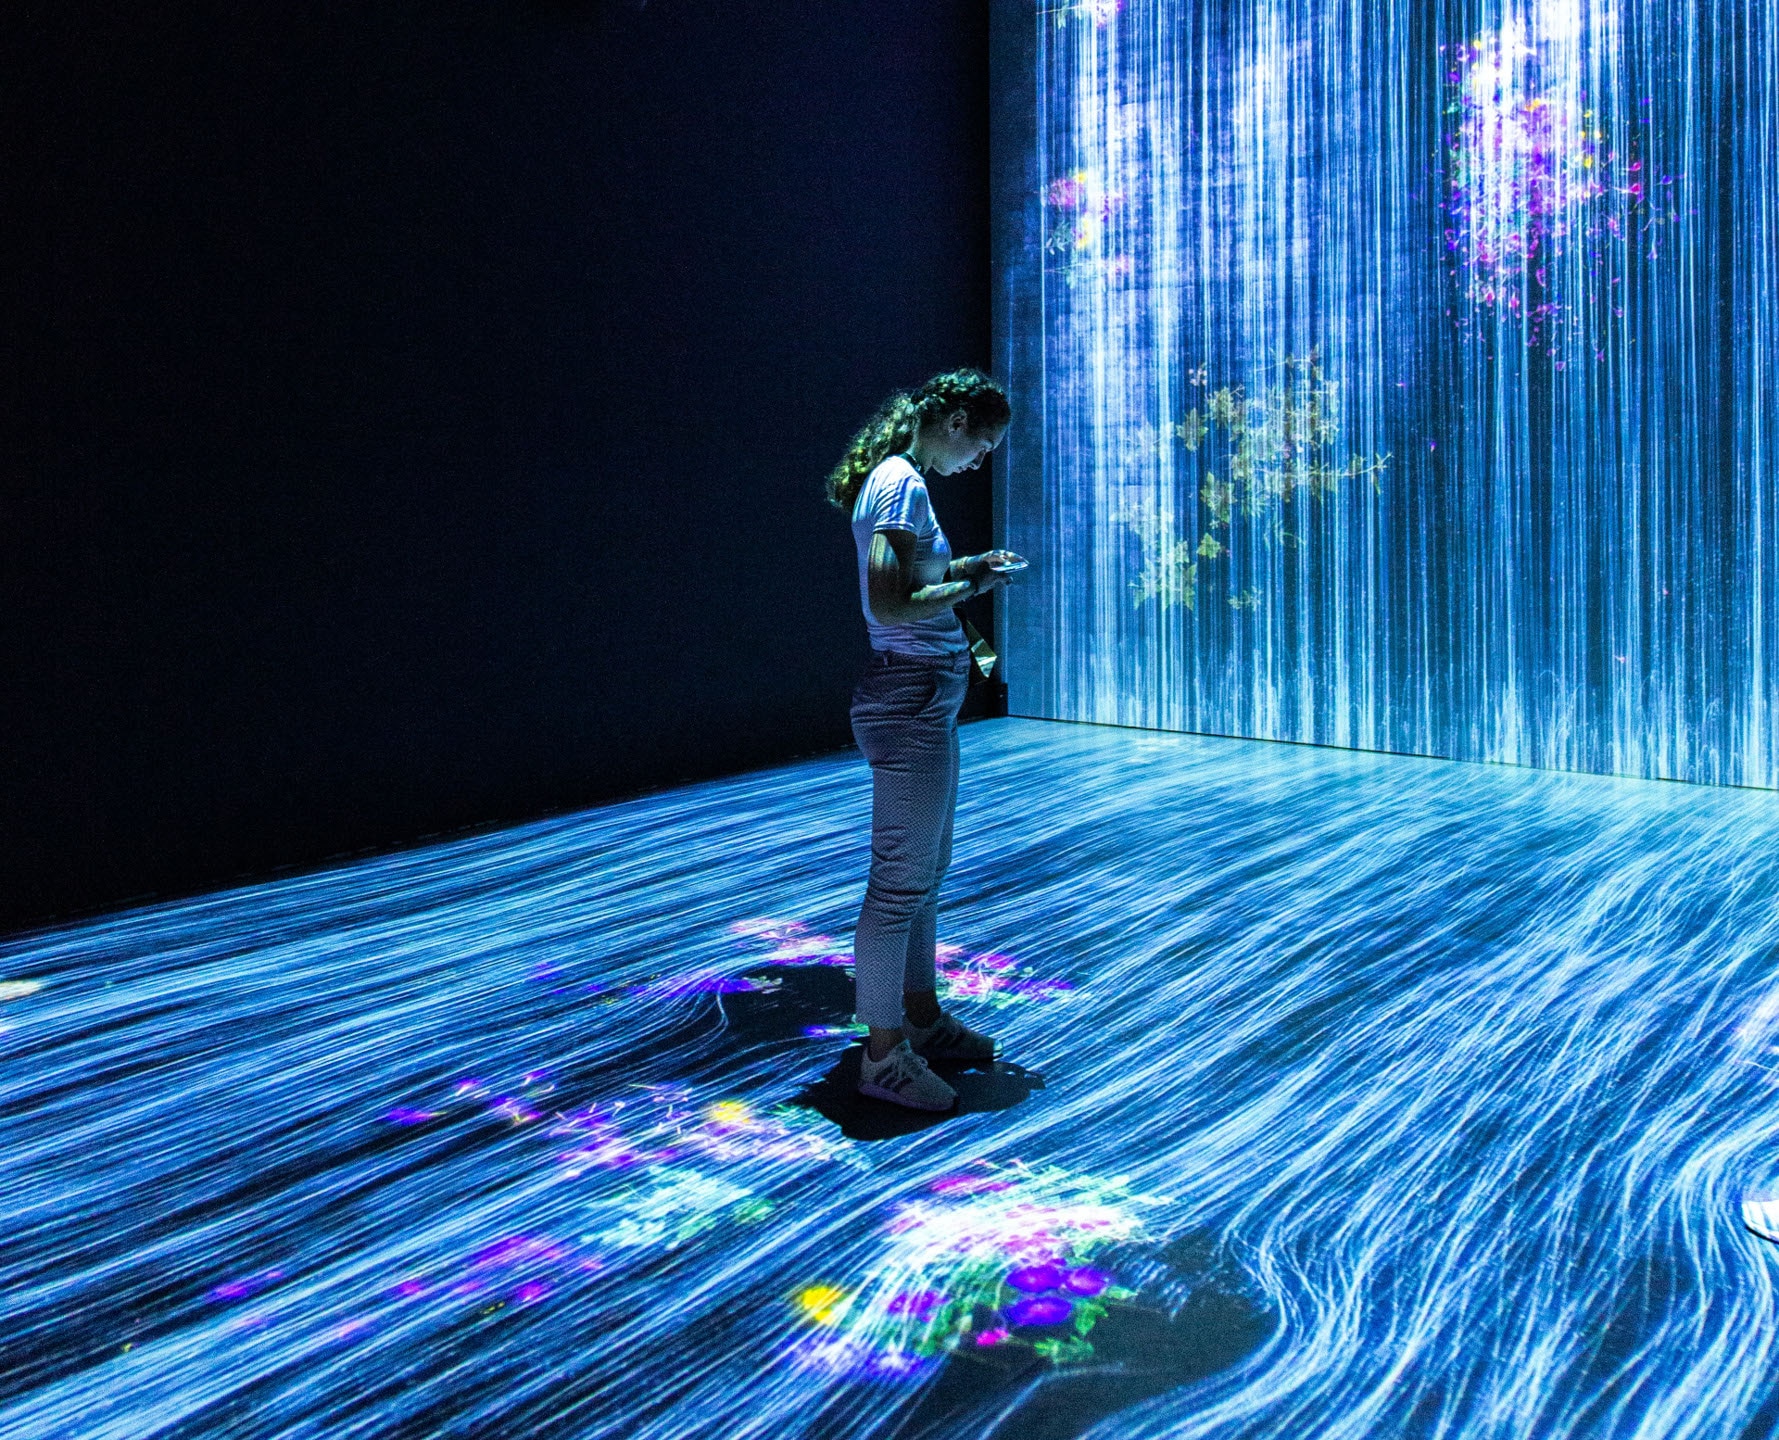 Girl standing in an i interactive art gallery with fibre like light projections scattered across the room.